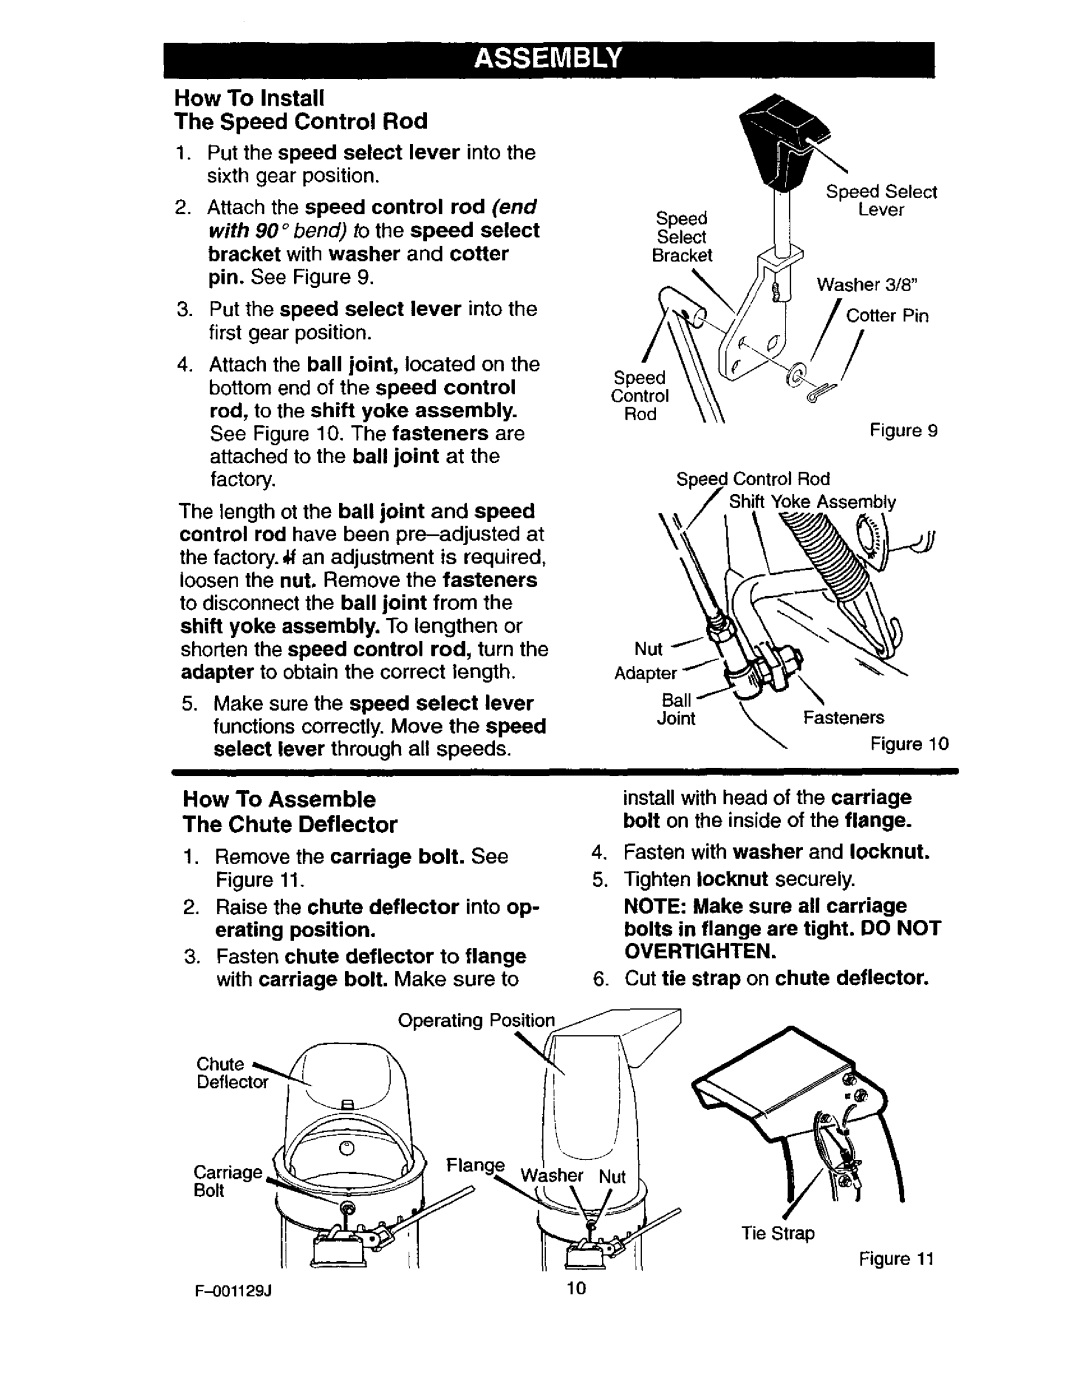 Craftsman 536.88112 operating instructions How To Install Speed Control Rod, How To Assemble Chute Deflector, Pin 